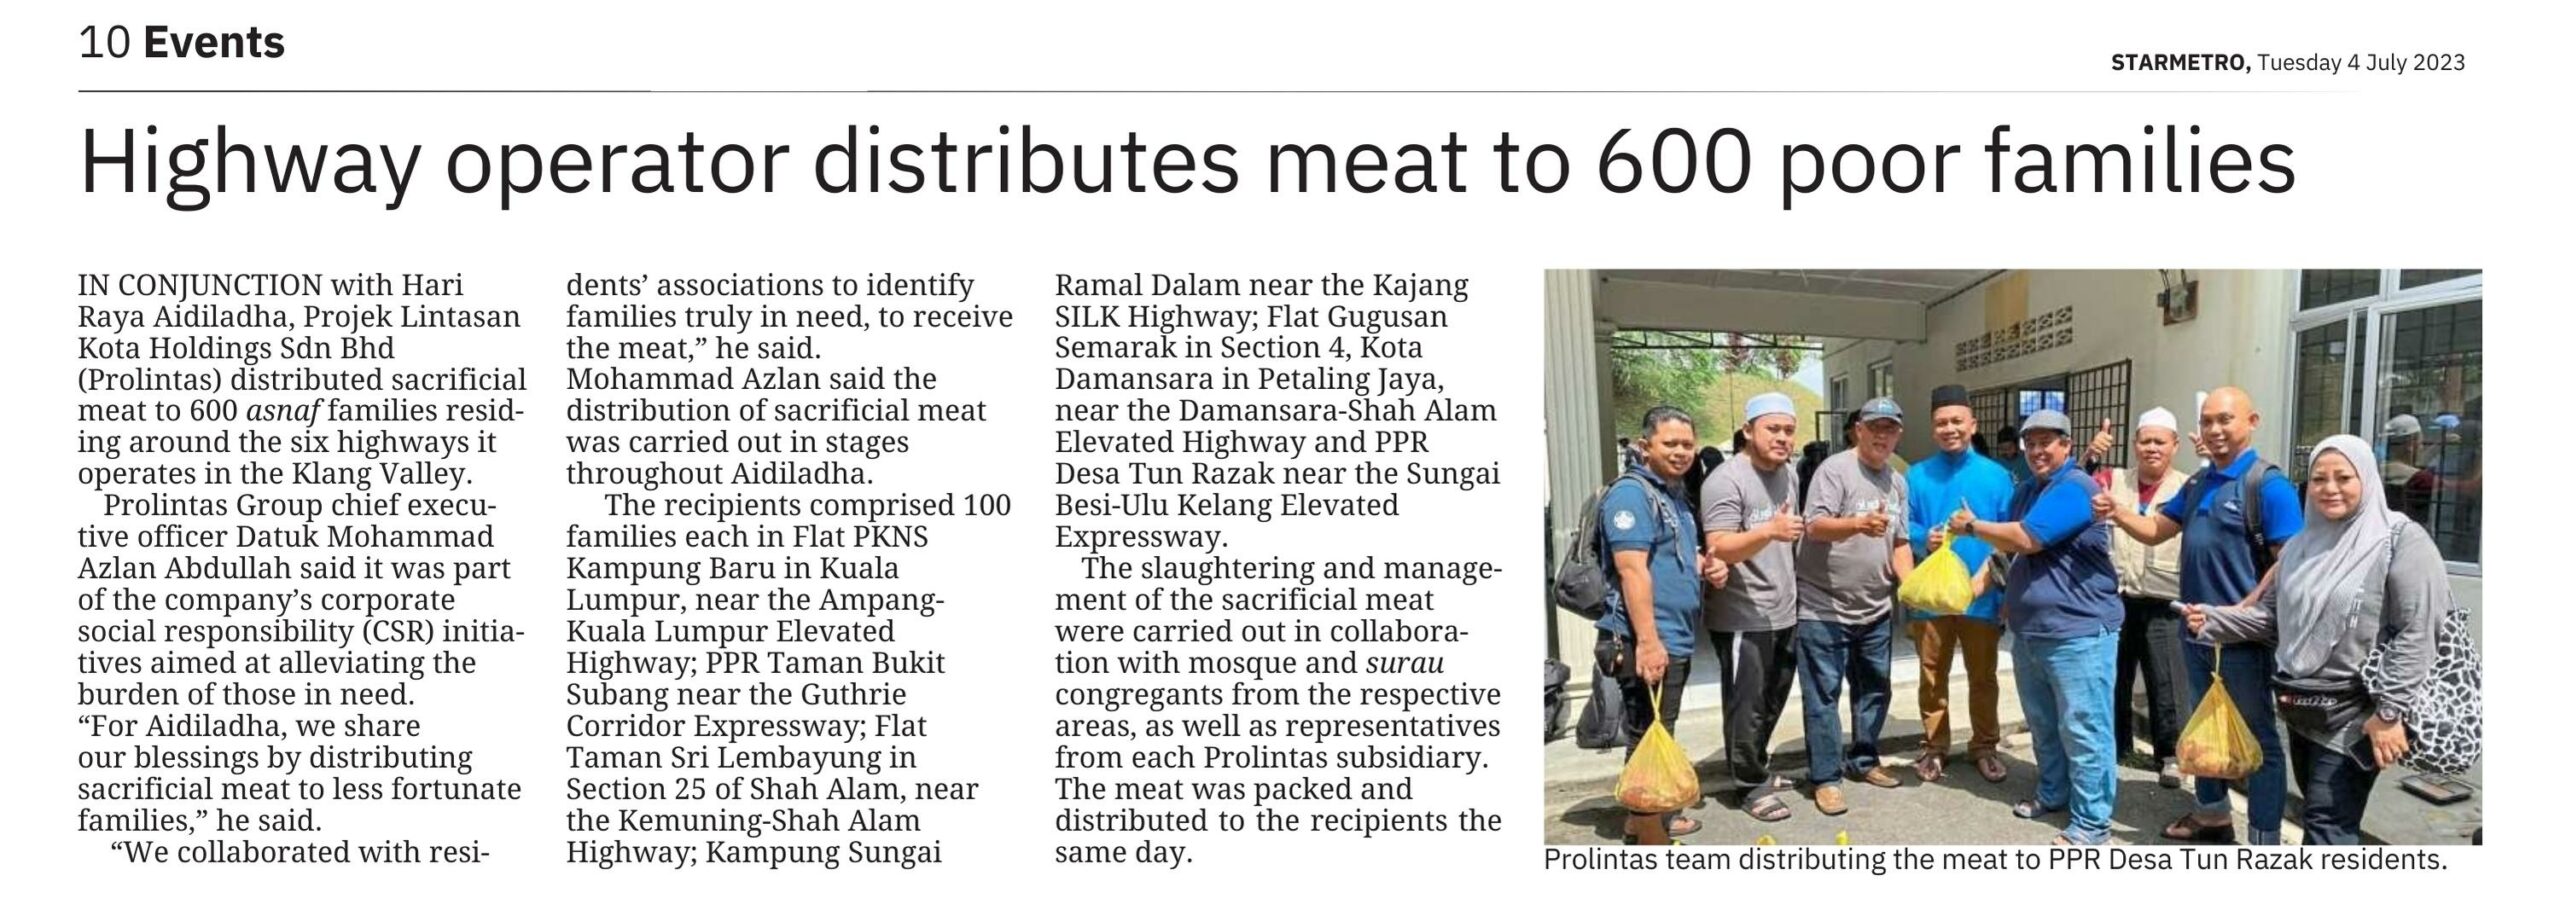 THE STAR | HIGHWAY OPERATOR DISTRIBUTES MEAT TO 600 POOR FAMILIES